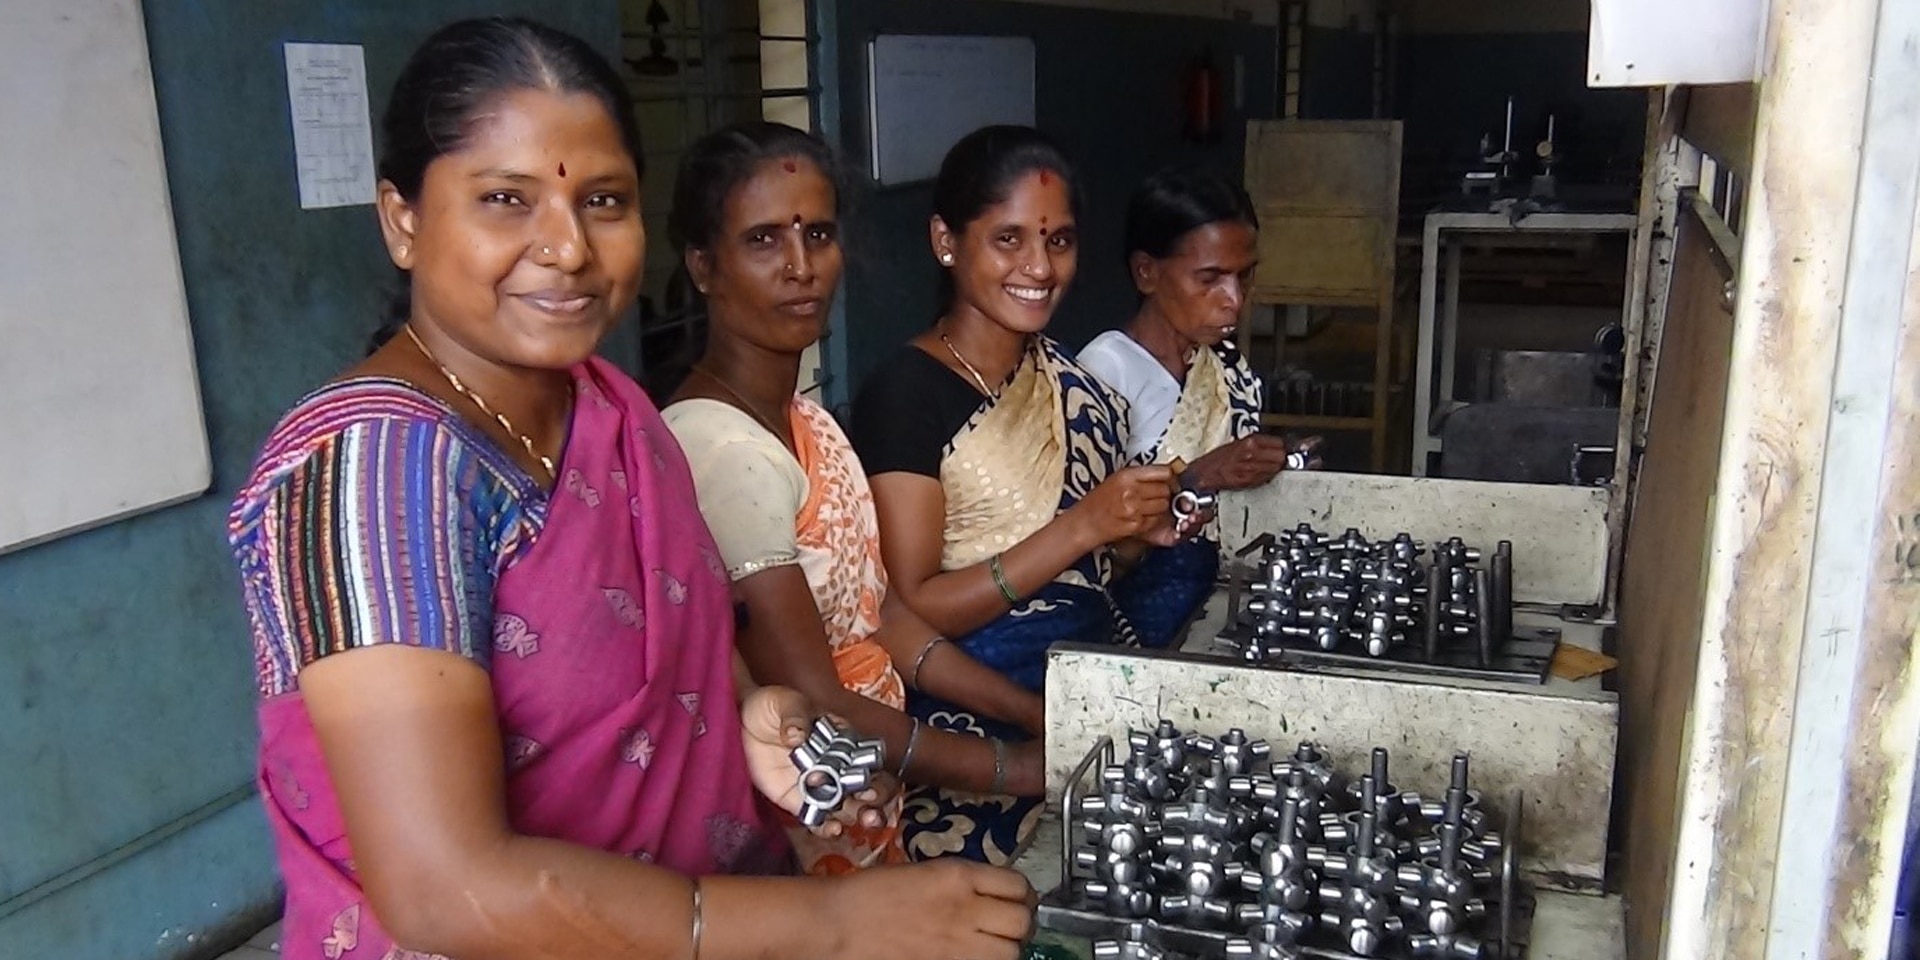 In the picture, four women of Indian origin pose smiling in front of the metal parts to be assembled.